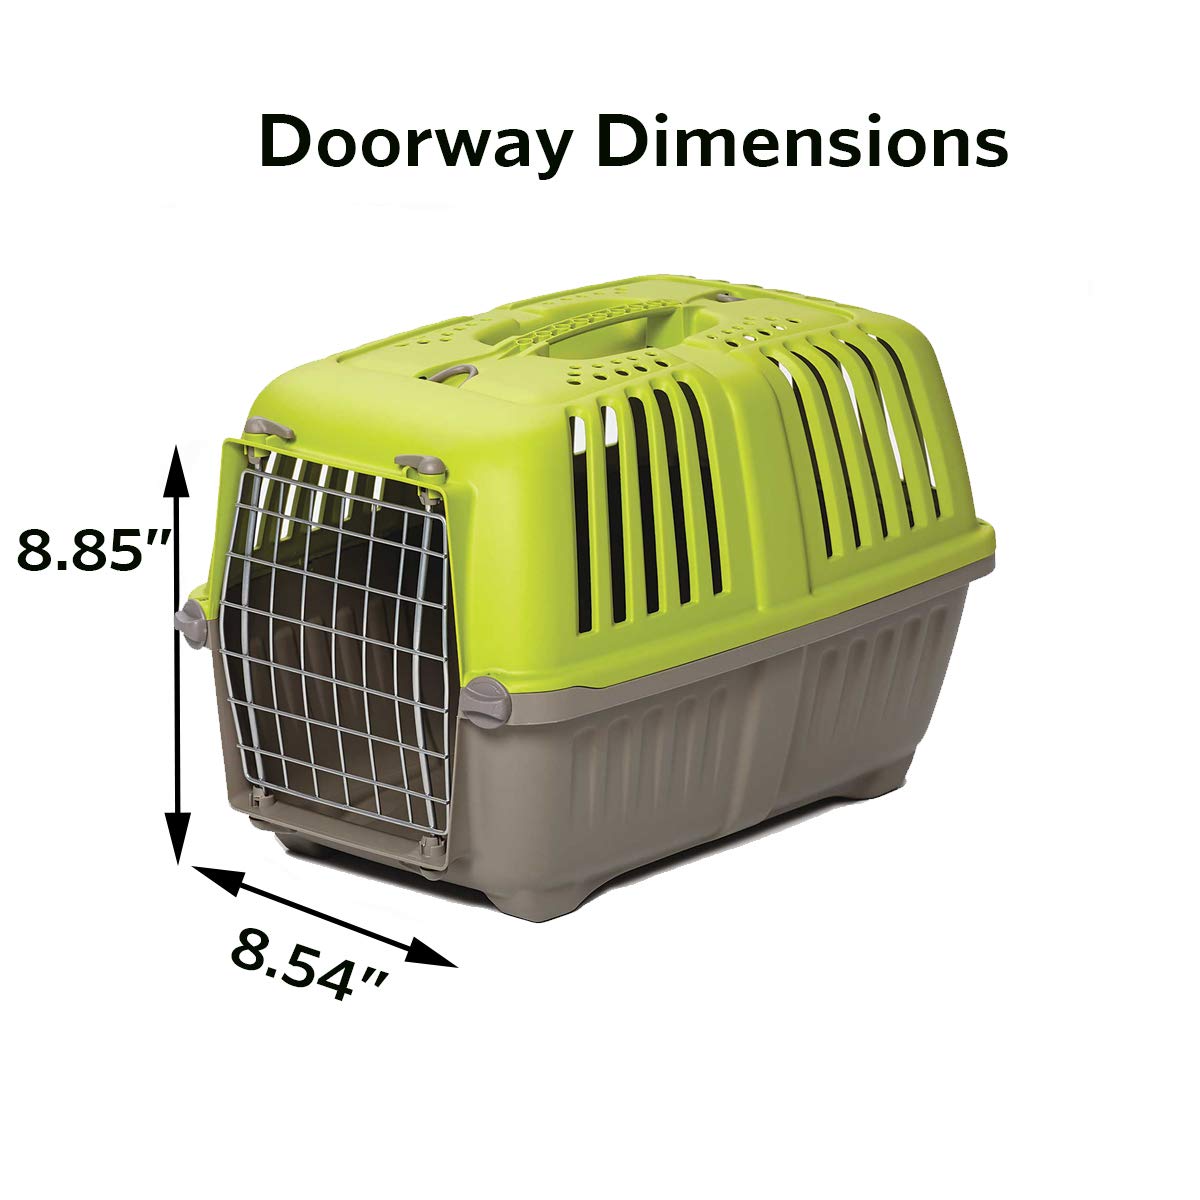 Midwest Spree Hard-Sided Travel Cat and Dog Kennel Carrier - Green - 22